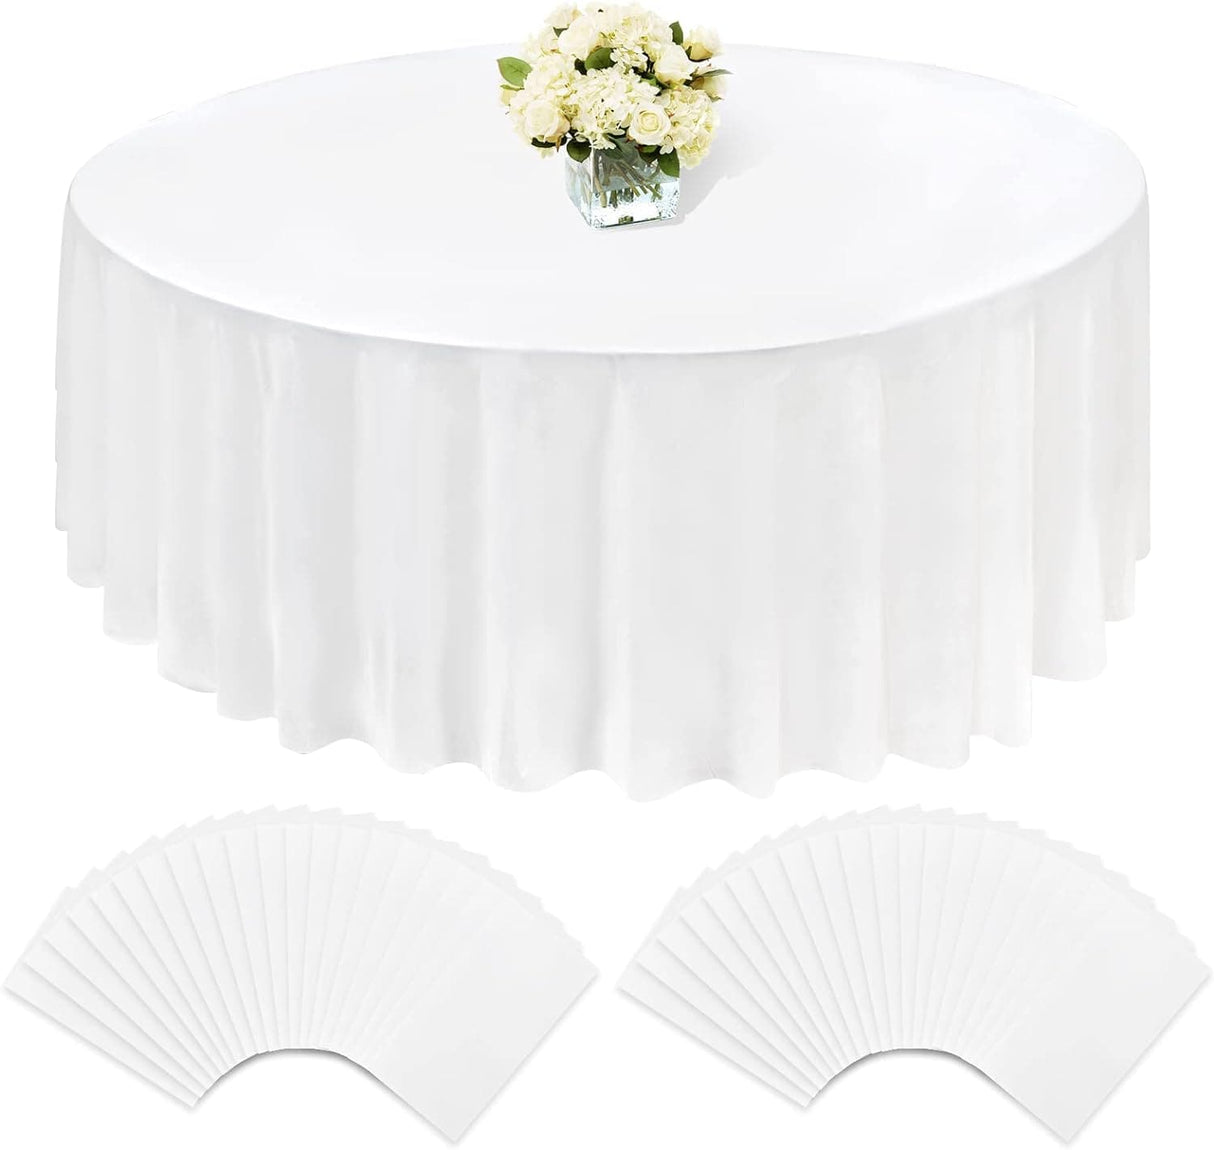 15/24/48 Pack Round Tablecloth 60/84/96 inch White Plastic Table Cloth for Round Tables, PEVA Water Resistant Disposable Tablecloth for Wedding, Parties, Holiday Dinner, Buffet, Baby Shower